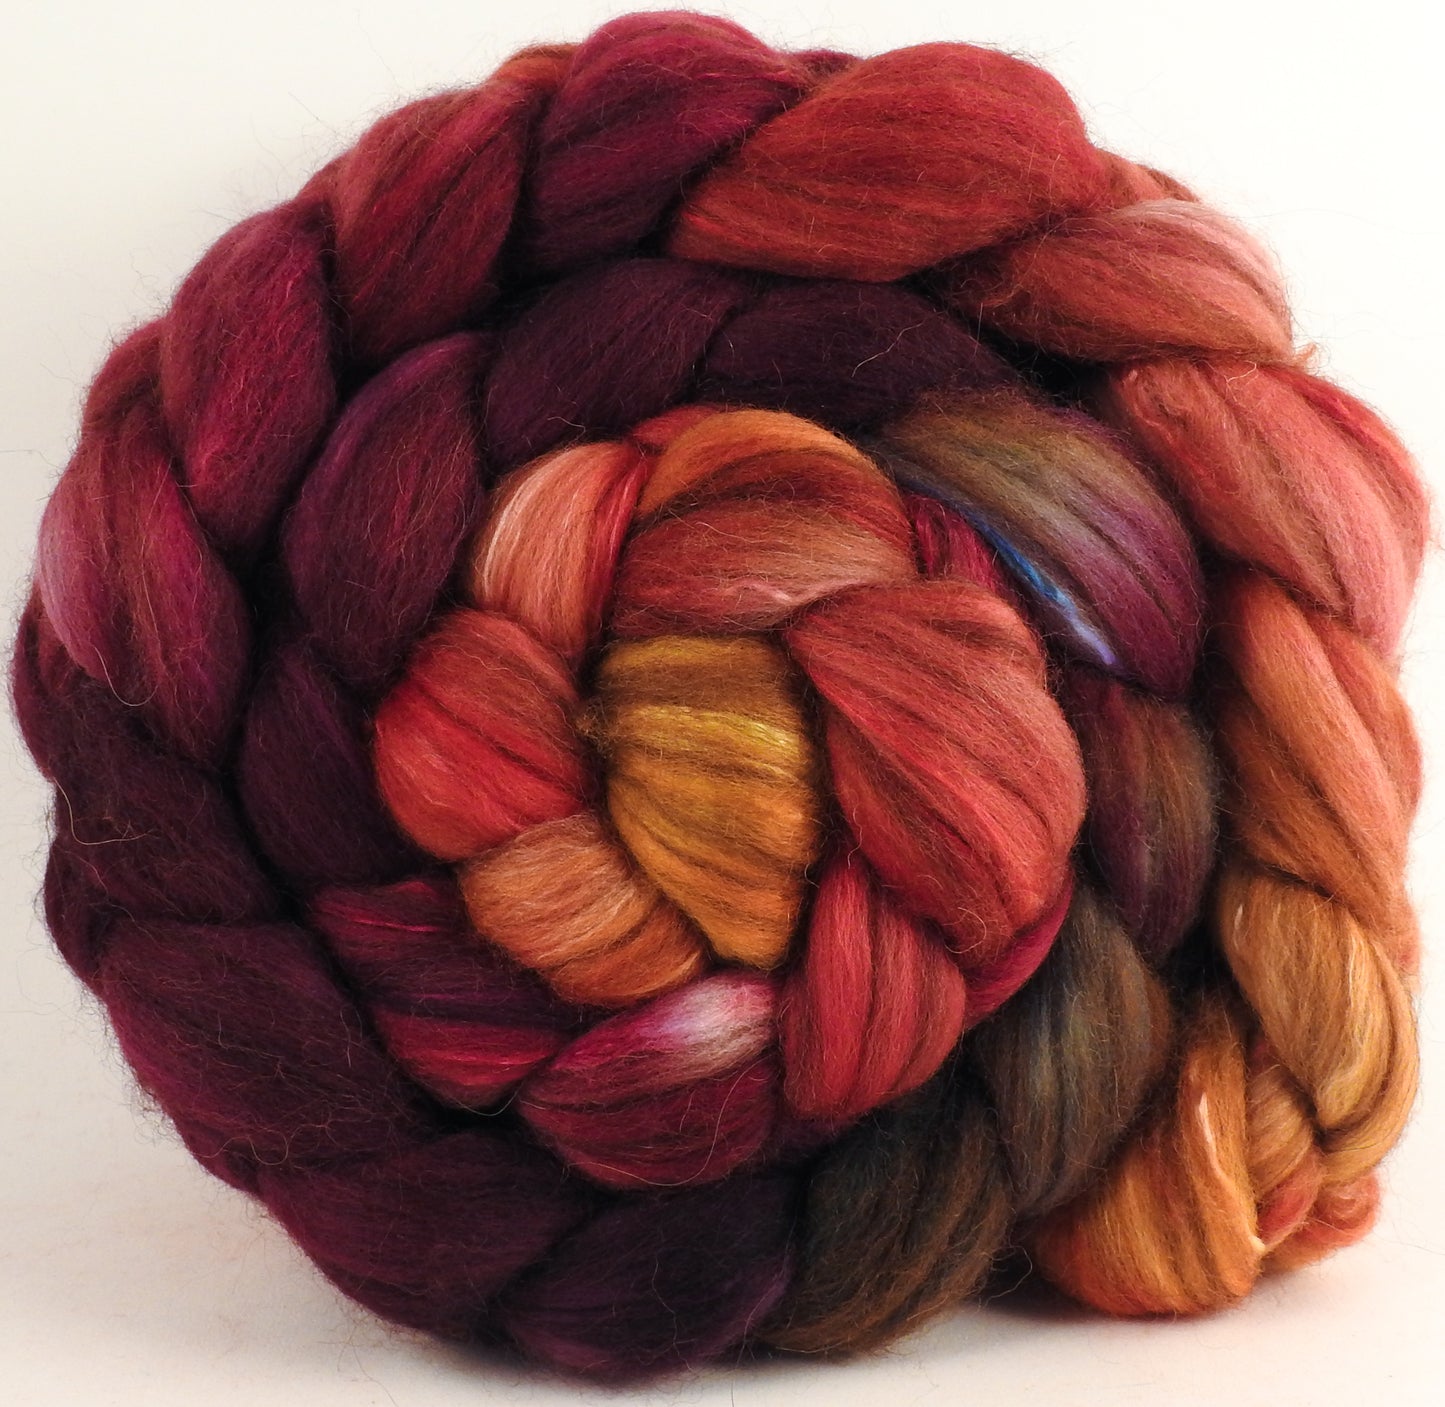 Hand dyed top for spinning -Cherry Medley (5.5 oz.) 18.5 mic merino/ camel/ brown alpaca/ mulberry silk/ (40/20/20/20)